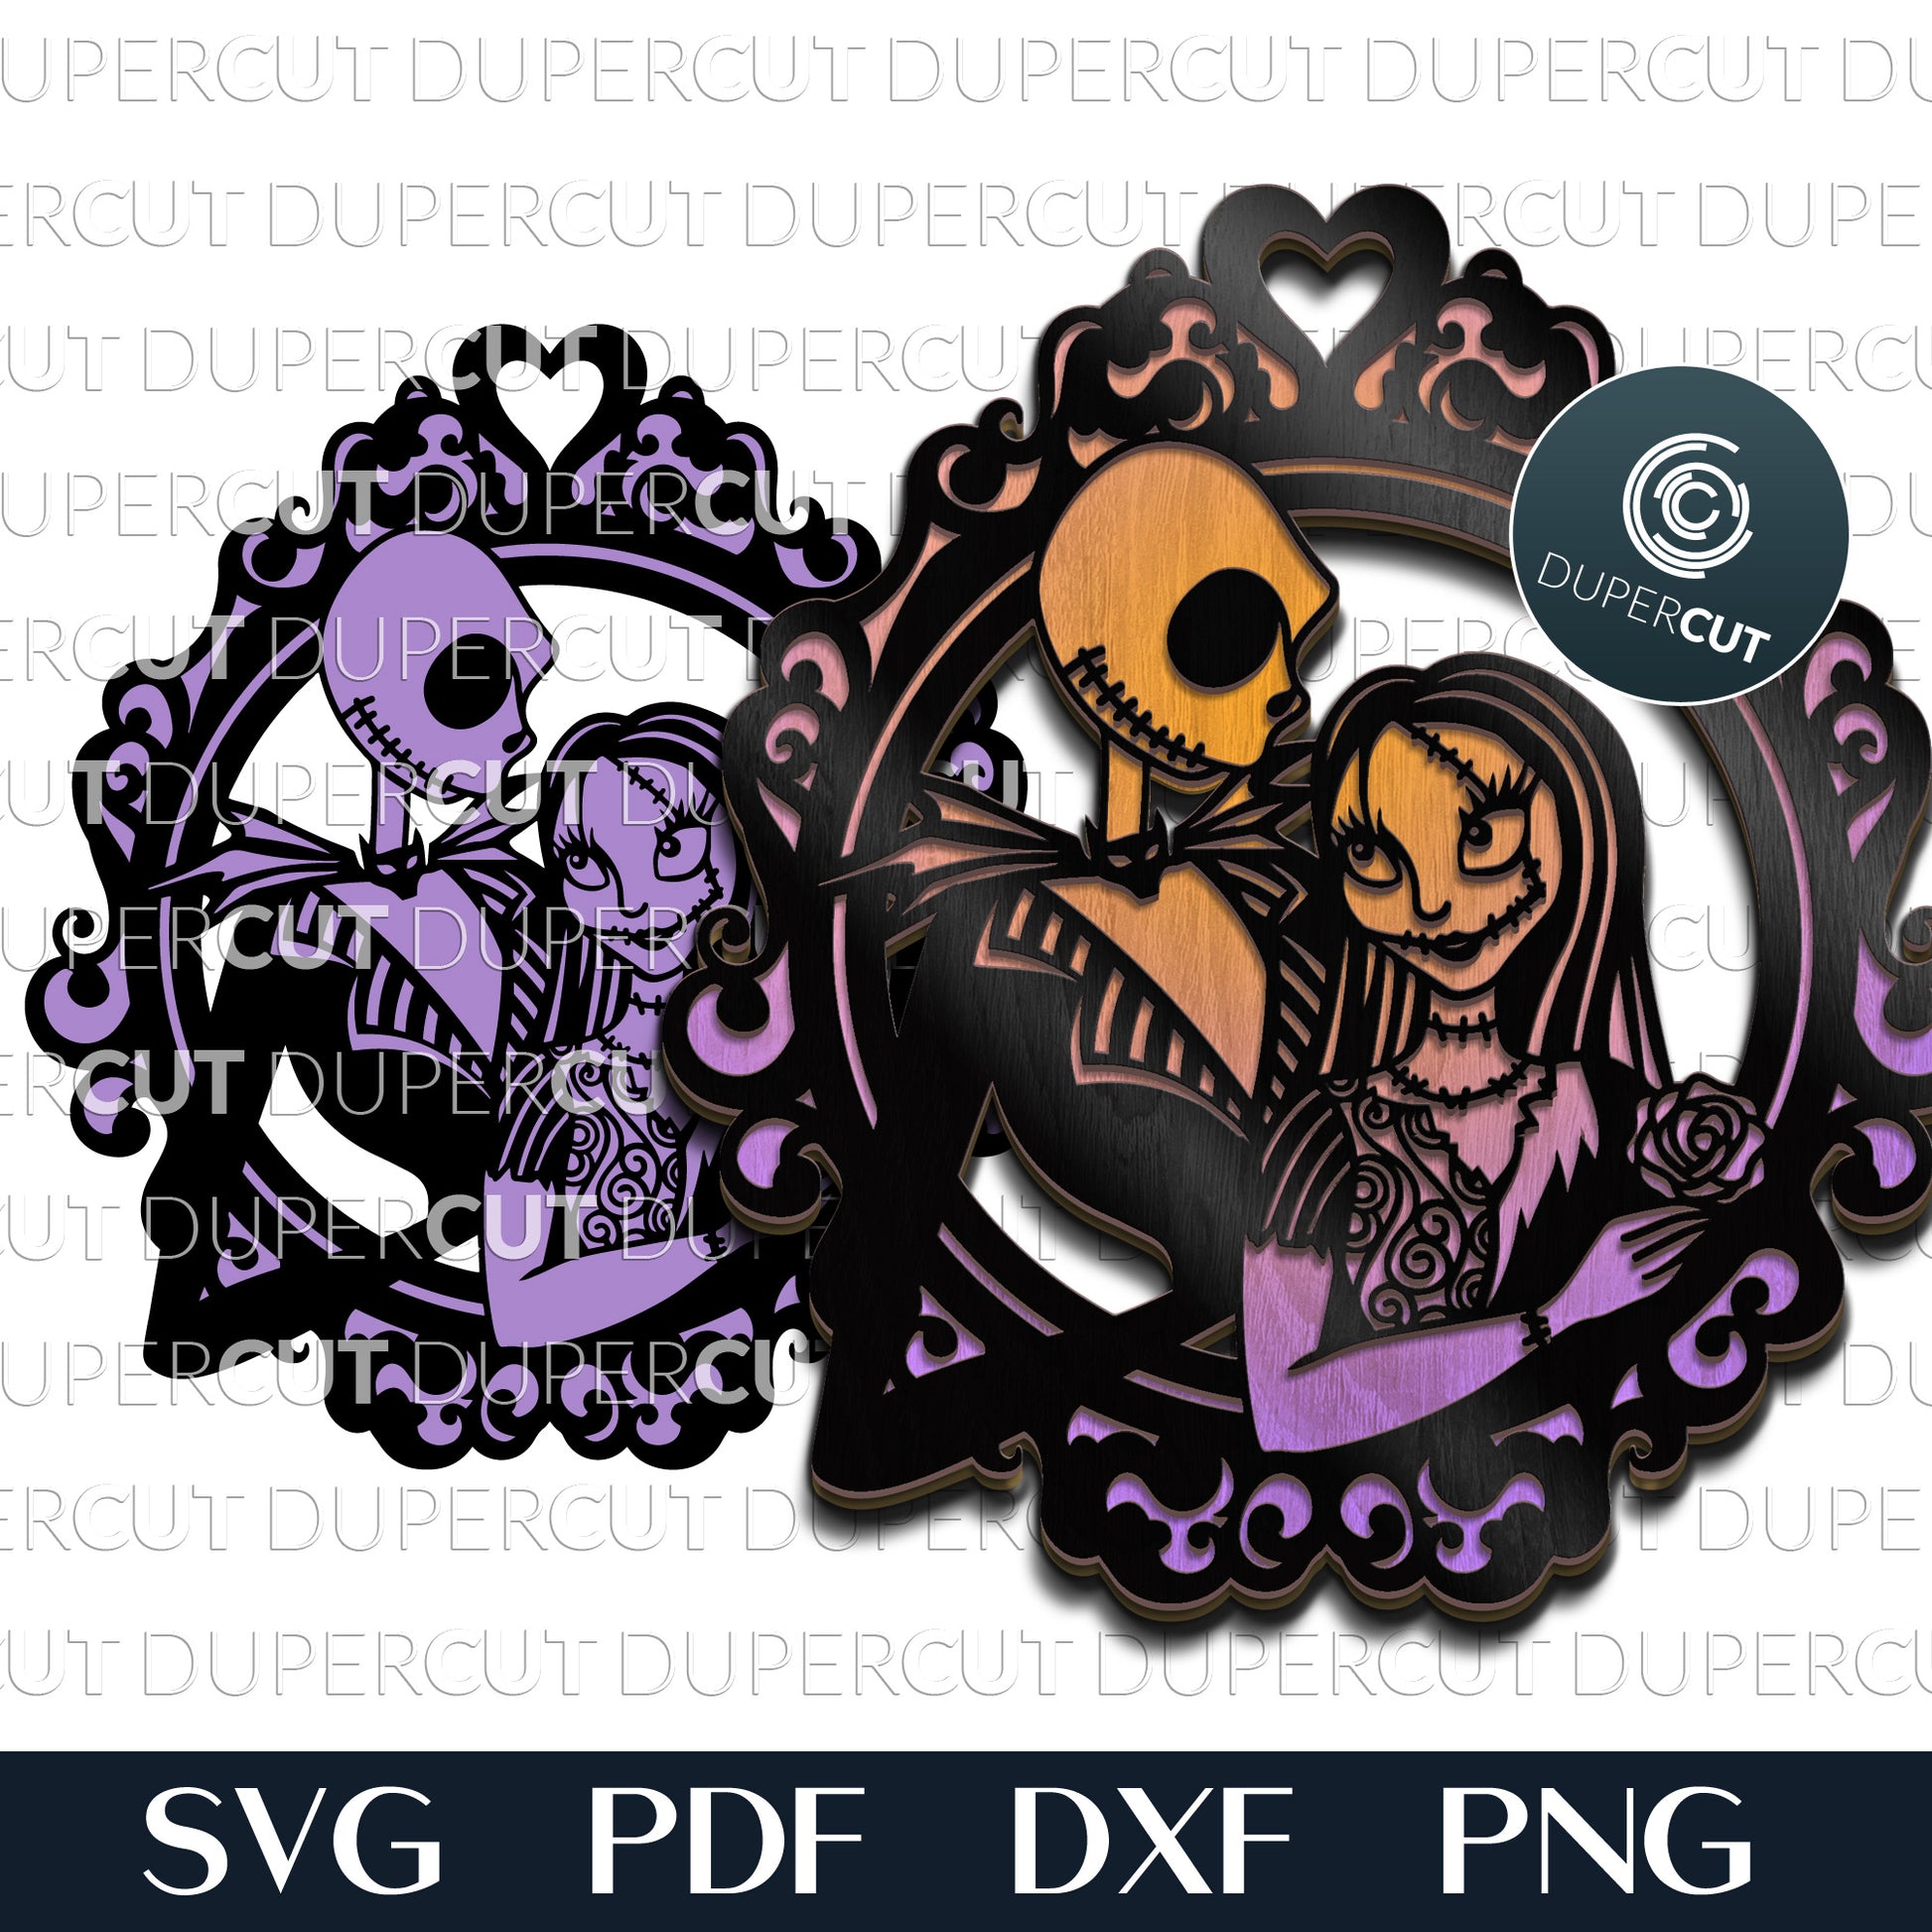 Jack and Sally door hanger layered cutting template - SVG DXF PNG vector files for laser and digital machines Glowforge, Cricut, Silhouette, CNC plasma by DuperCut